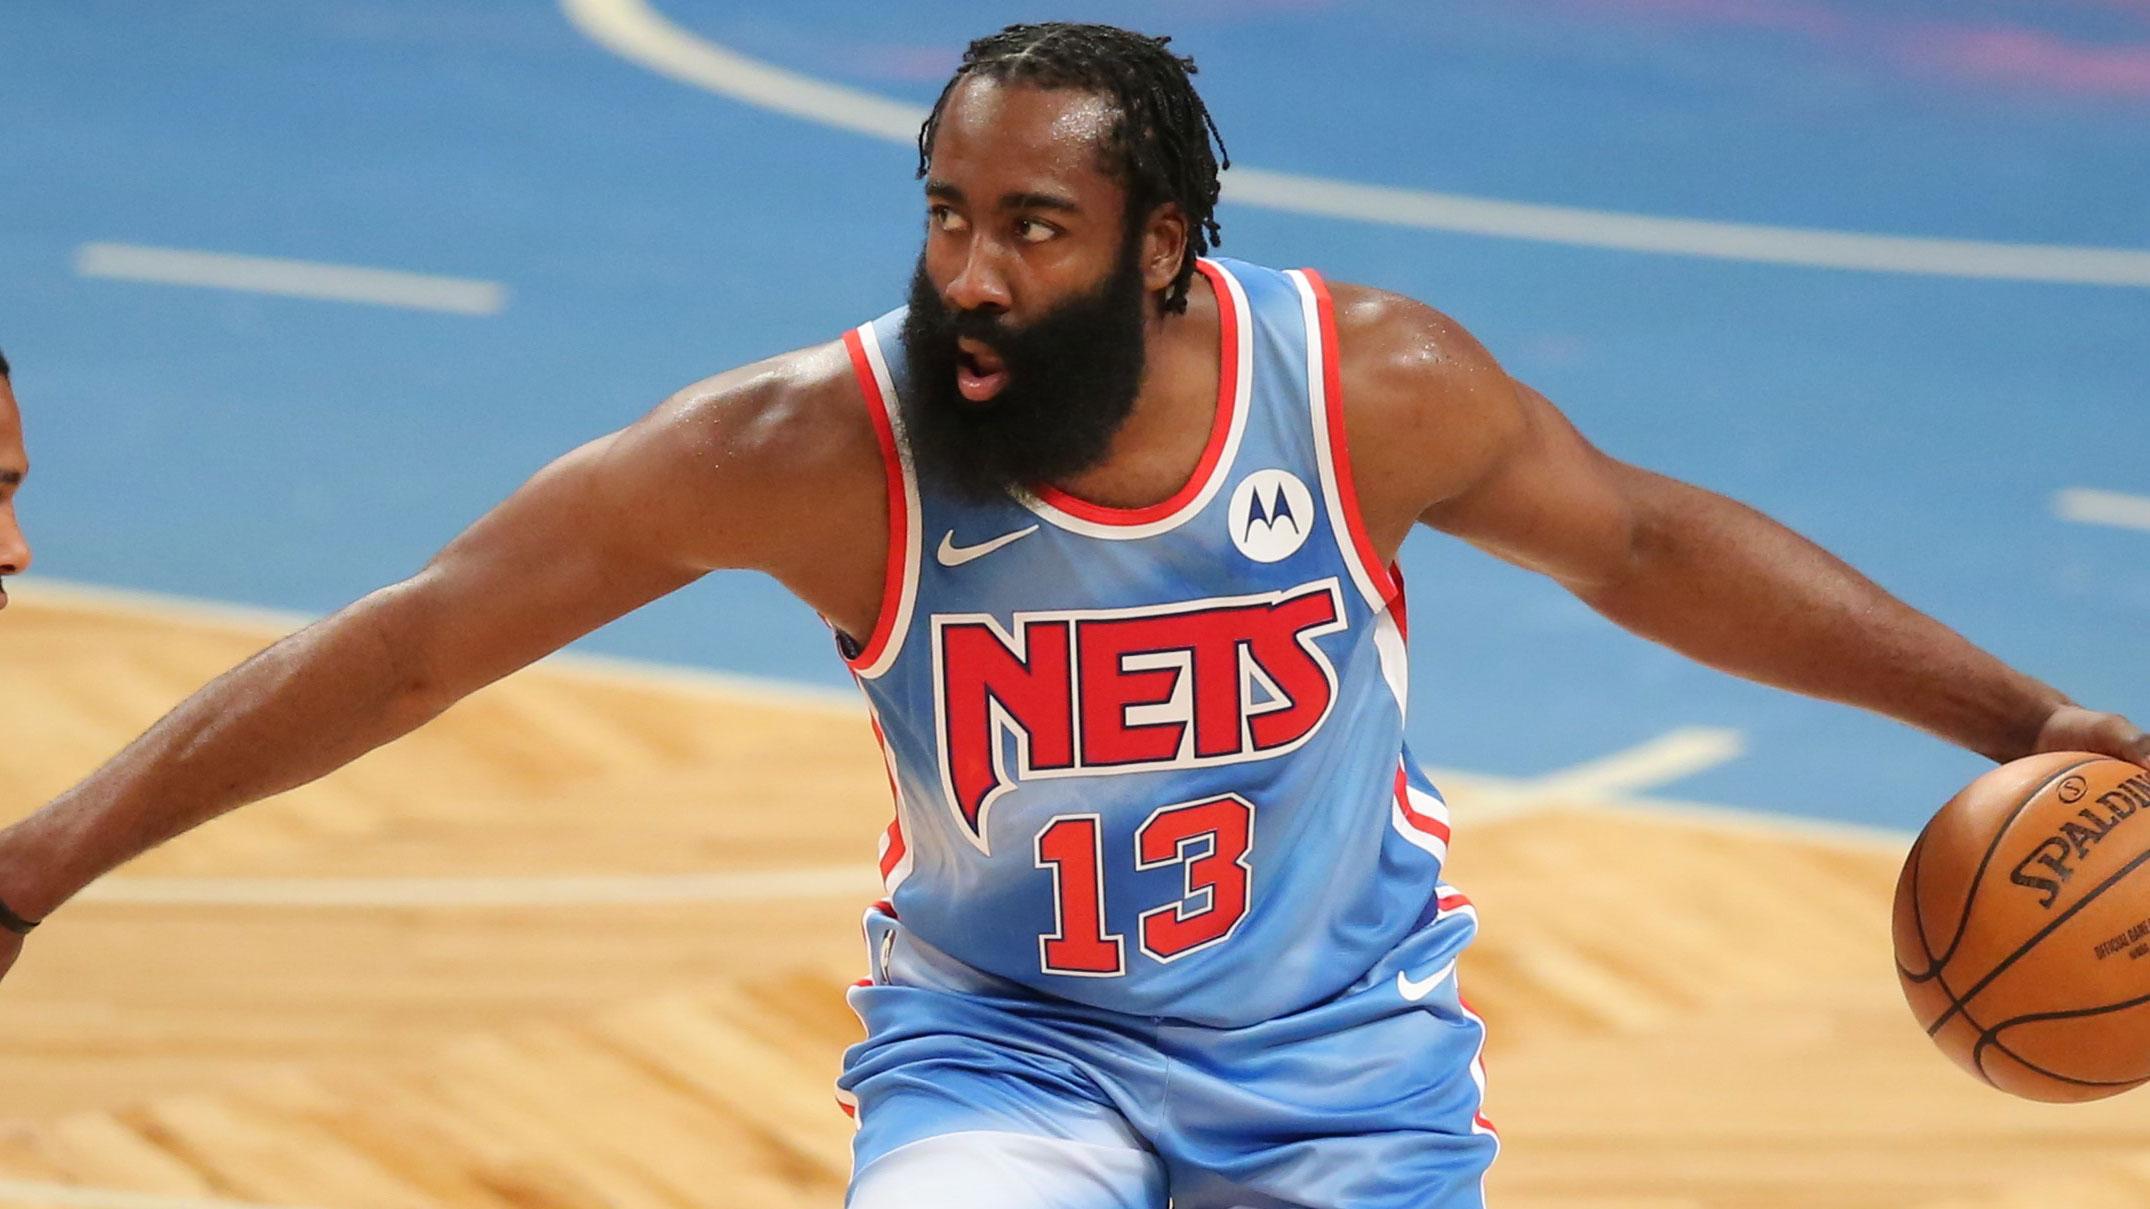 Mar 31, 2021; Brooklyn, New York, USA; Brooklyn Nets shooting guard James Harden (13) dribbles the ball while defended by Houston Rockets power forward D.J. Wilson (0) during the first quarter at Barclays Center. / Brad Penner-USA TODAY Sports